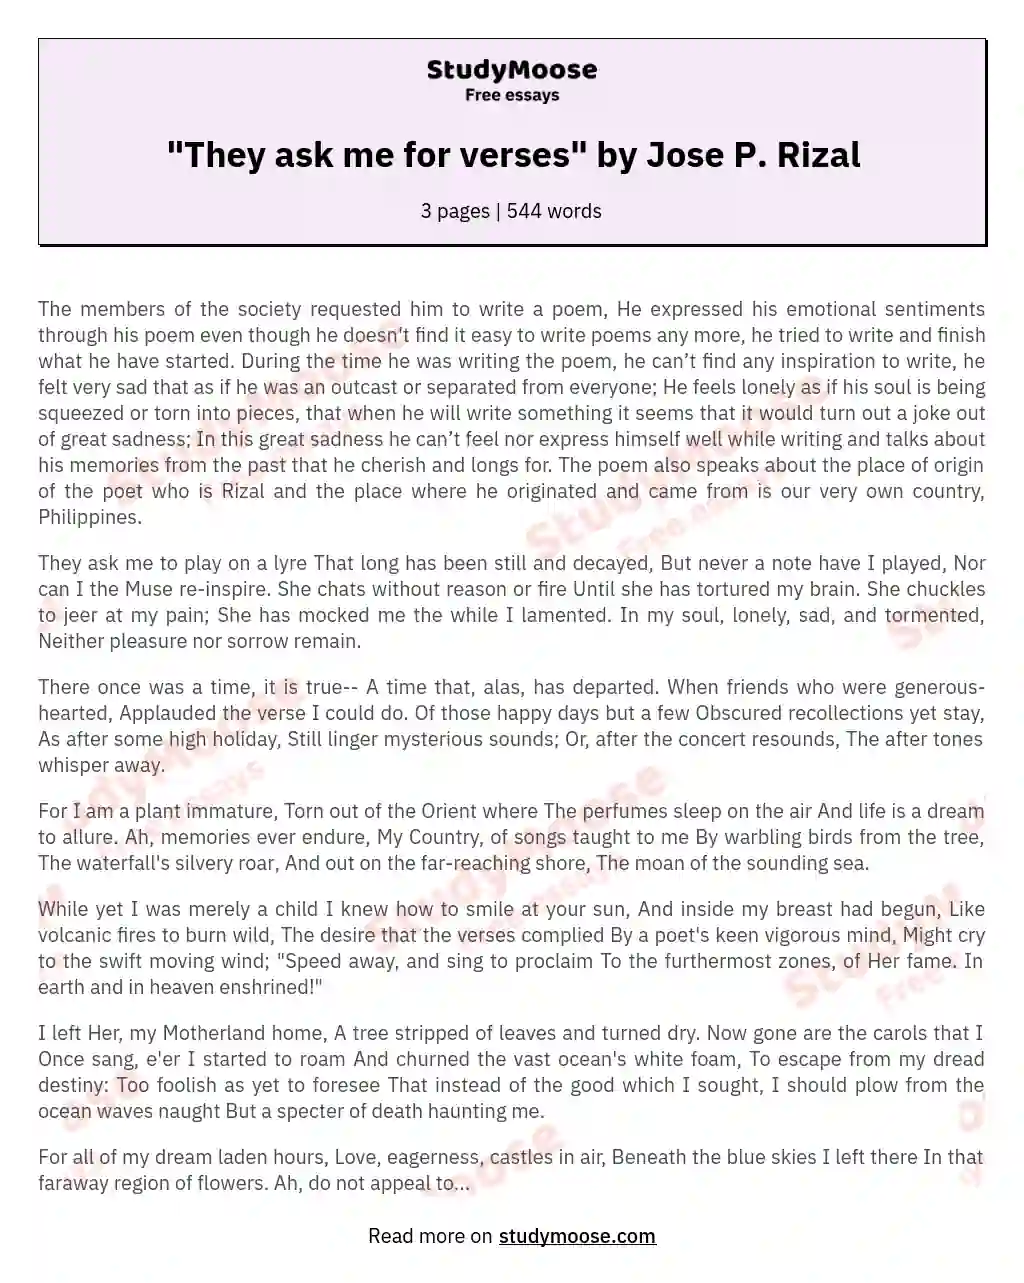 "They ask me for verses" by Jose P. Rizal essay